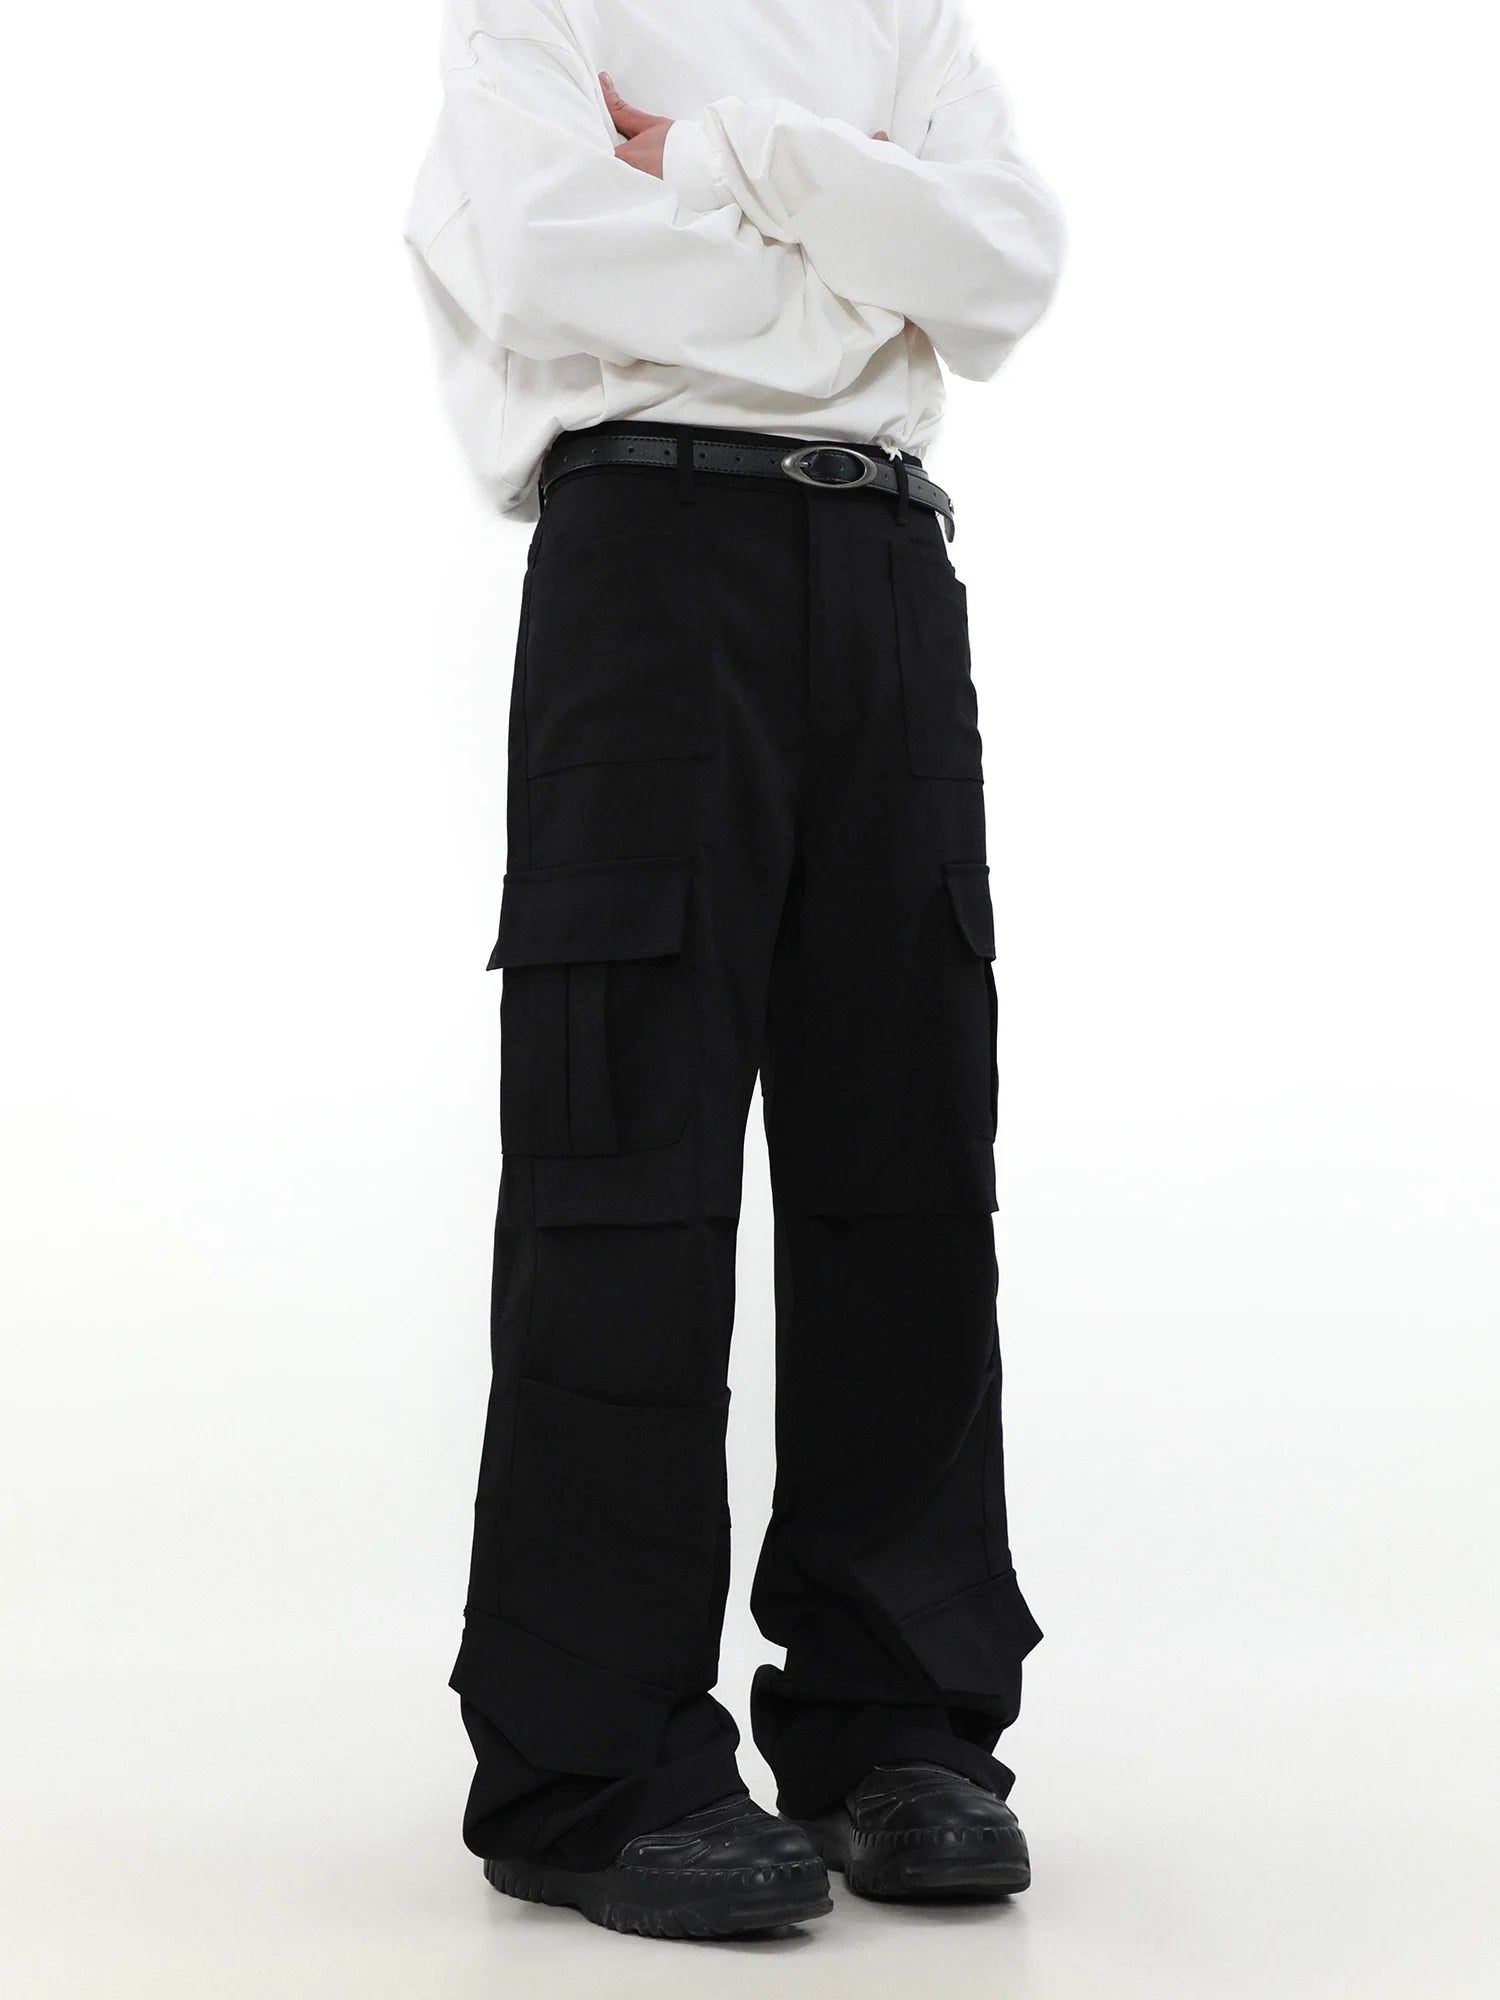 Vintage Utility Trousers - chiclara